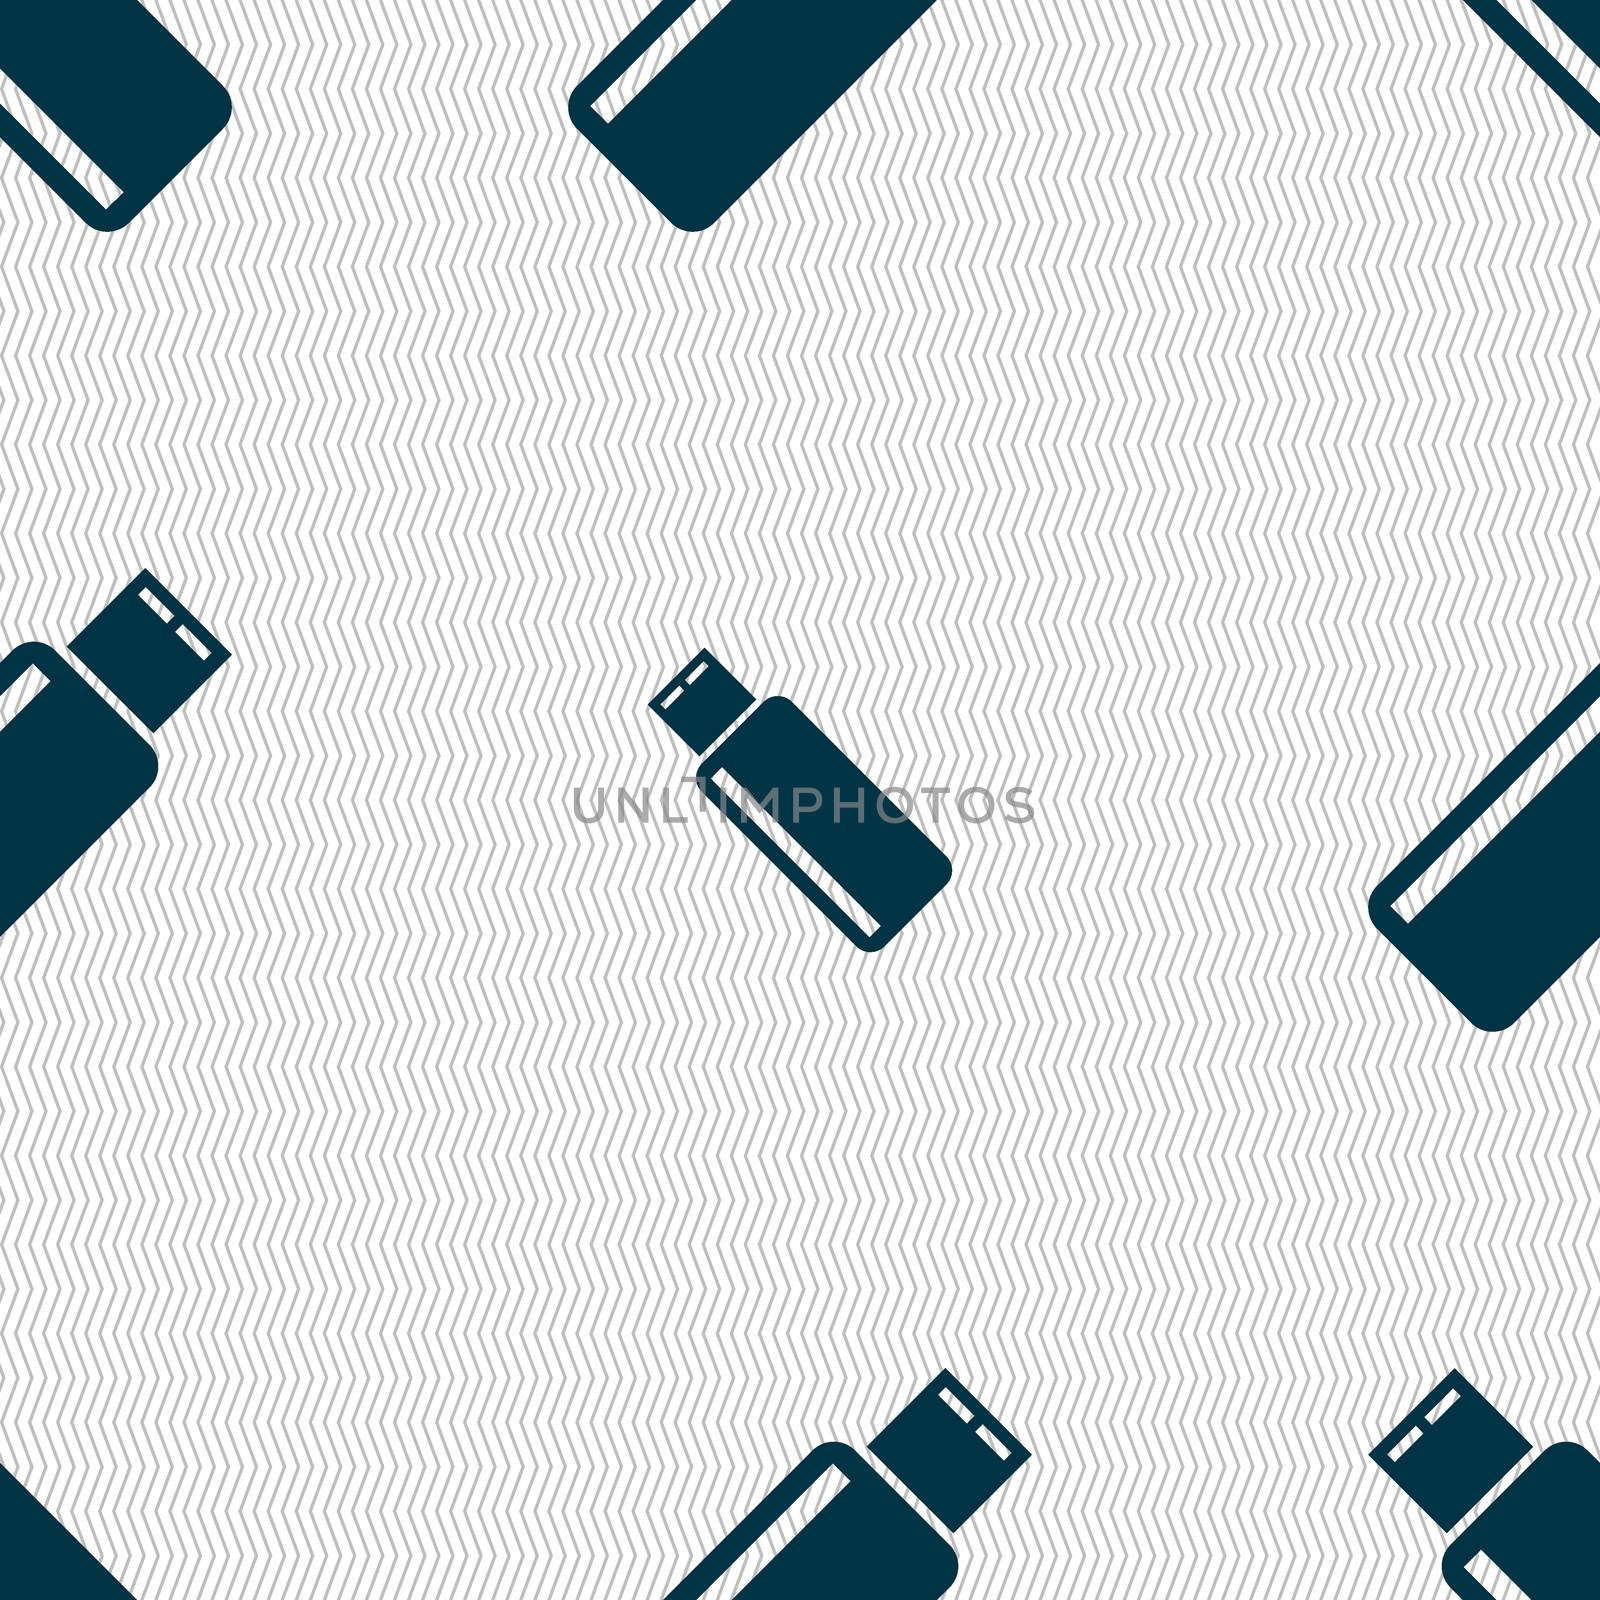 Usb sign icon. Usb flash drive stick symbol. Seamless abstract background with geometric shapes. illustration